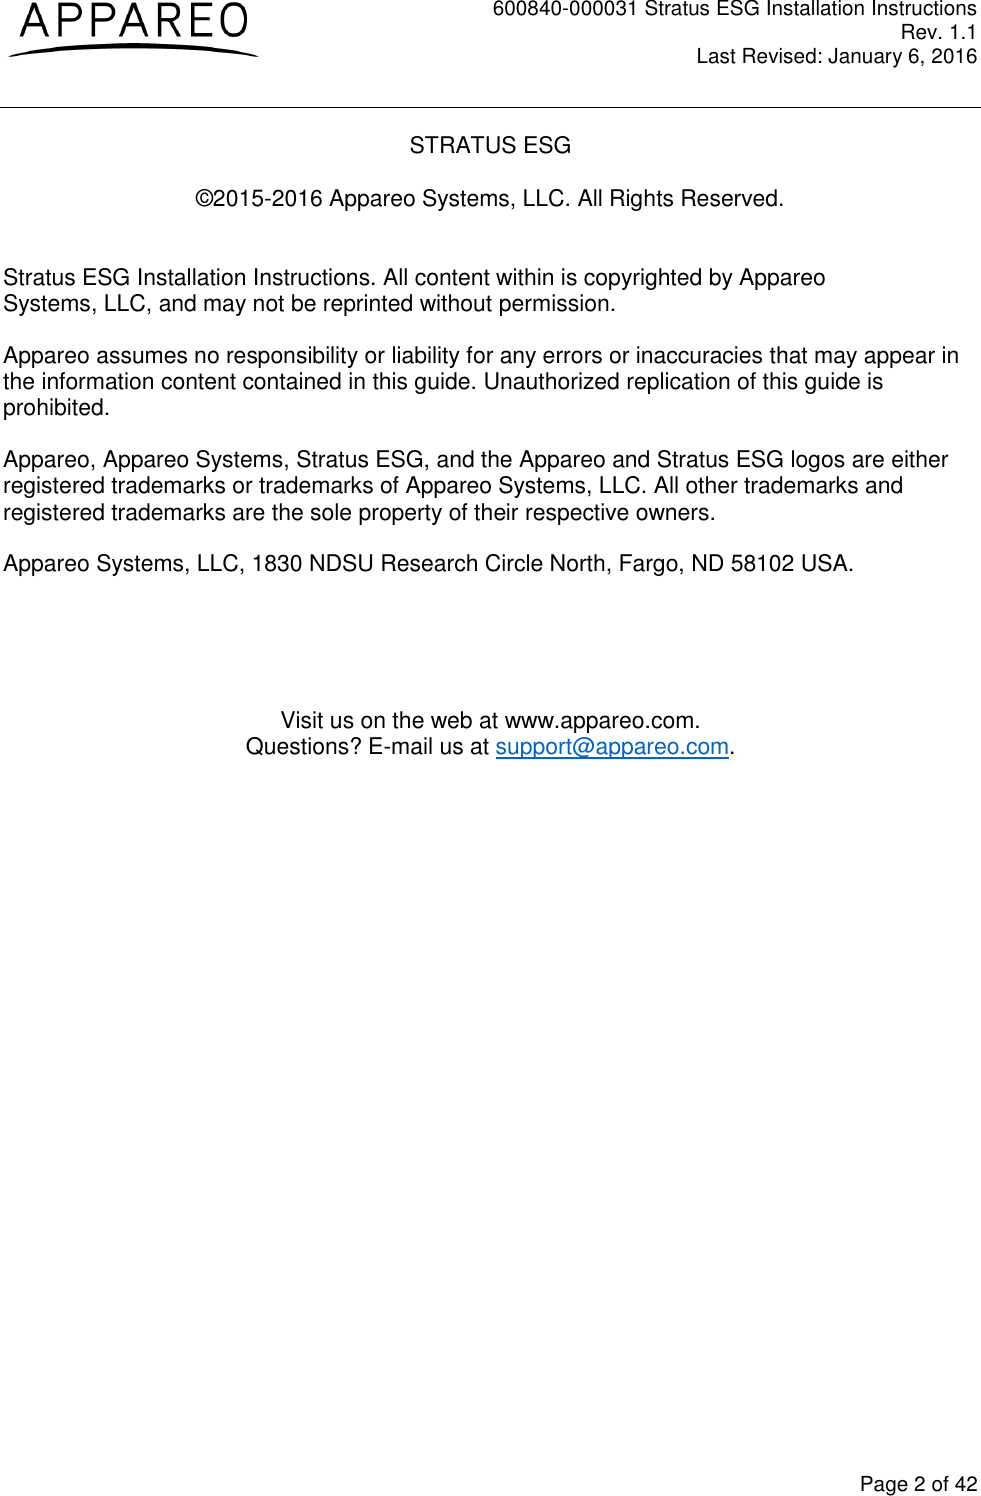 600840-000031 Stratus ESG Installation Instructions Rev. 1.1 Last Revised: January 6, 2016  Page 2 of 42 STRATUS ESG  ©2015-2016 Appareo Systems, LLC. All Rights Reserved.   Stratus ESG Installation Instructions. All content within is copyrighted by Appareo Systems, LLC, and may not be reprinted without permission. Appareo assumes no responsibility or liability for any errors or inaccuracies that may appear in the information content contained in this guide. Unauthorized replication of this guide is prohibited. Appareo, Appareo Systems, Stratus ESG, and the Appareo and Stratus ESG logos are either registered trademarks or trademarks of Appareo Systems, LLC. All other trademarks and registered trademarks are the sole property of their respective owners. Appareo Systems, LLC, 1830 NDSU Research Circle North, Fargo, ND 58102 USA.     Visit us on the web at www.appareo.com. Questions? E-mail us at support@appareo.com.  